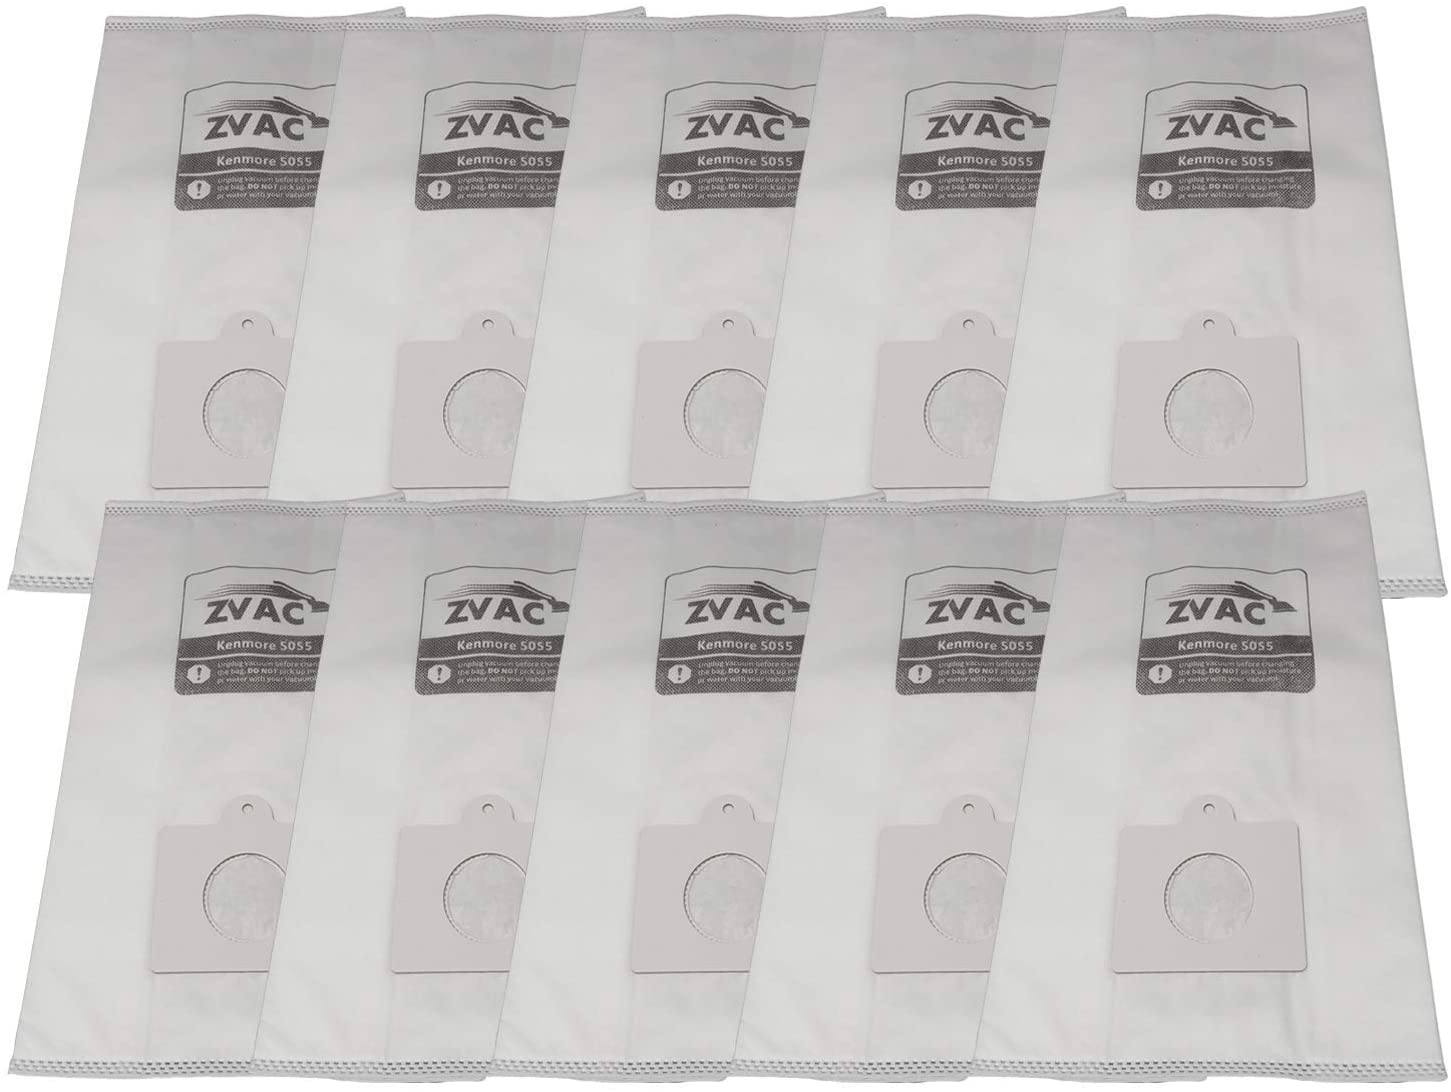 Zvac Kenmore Canister Ati-Allergen Hepa Microfiltration Vacuum Cleaner Bags. Fits Styles 50558, 5055, 50557. 10 Bags